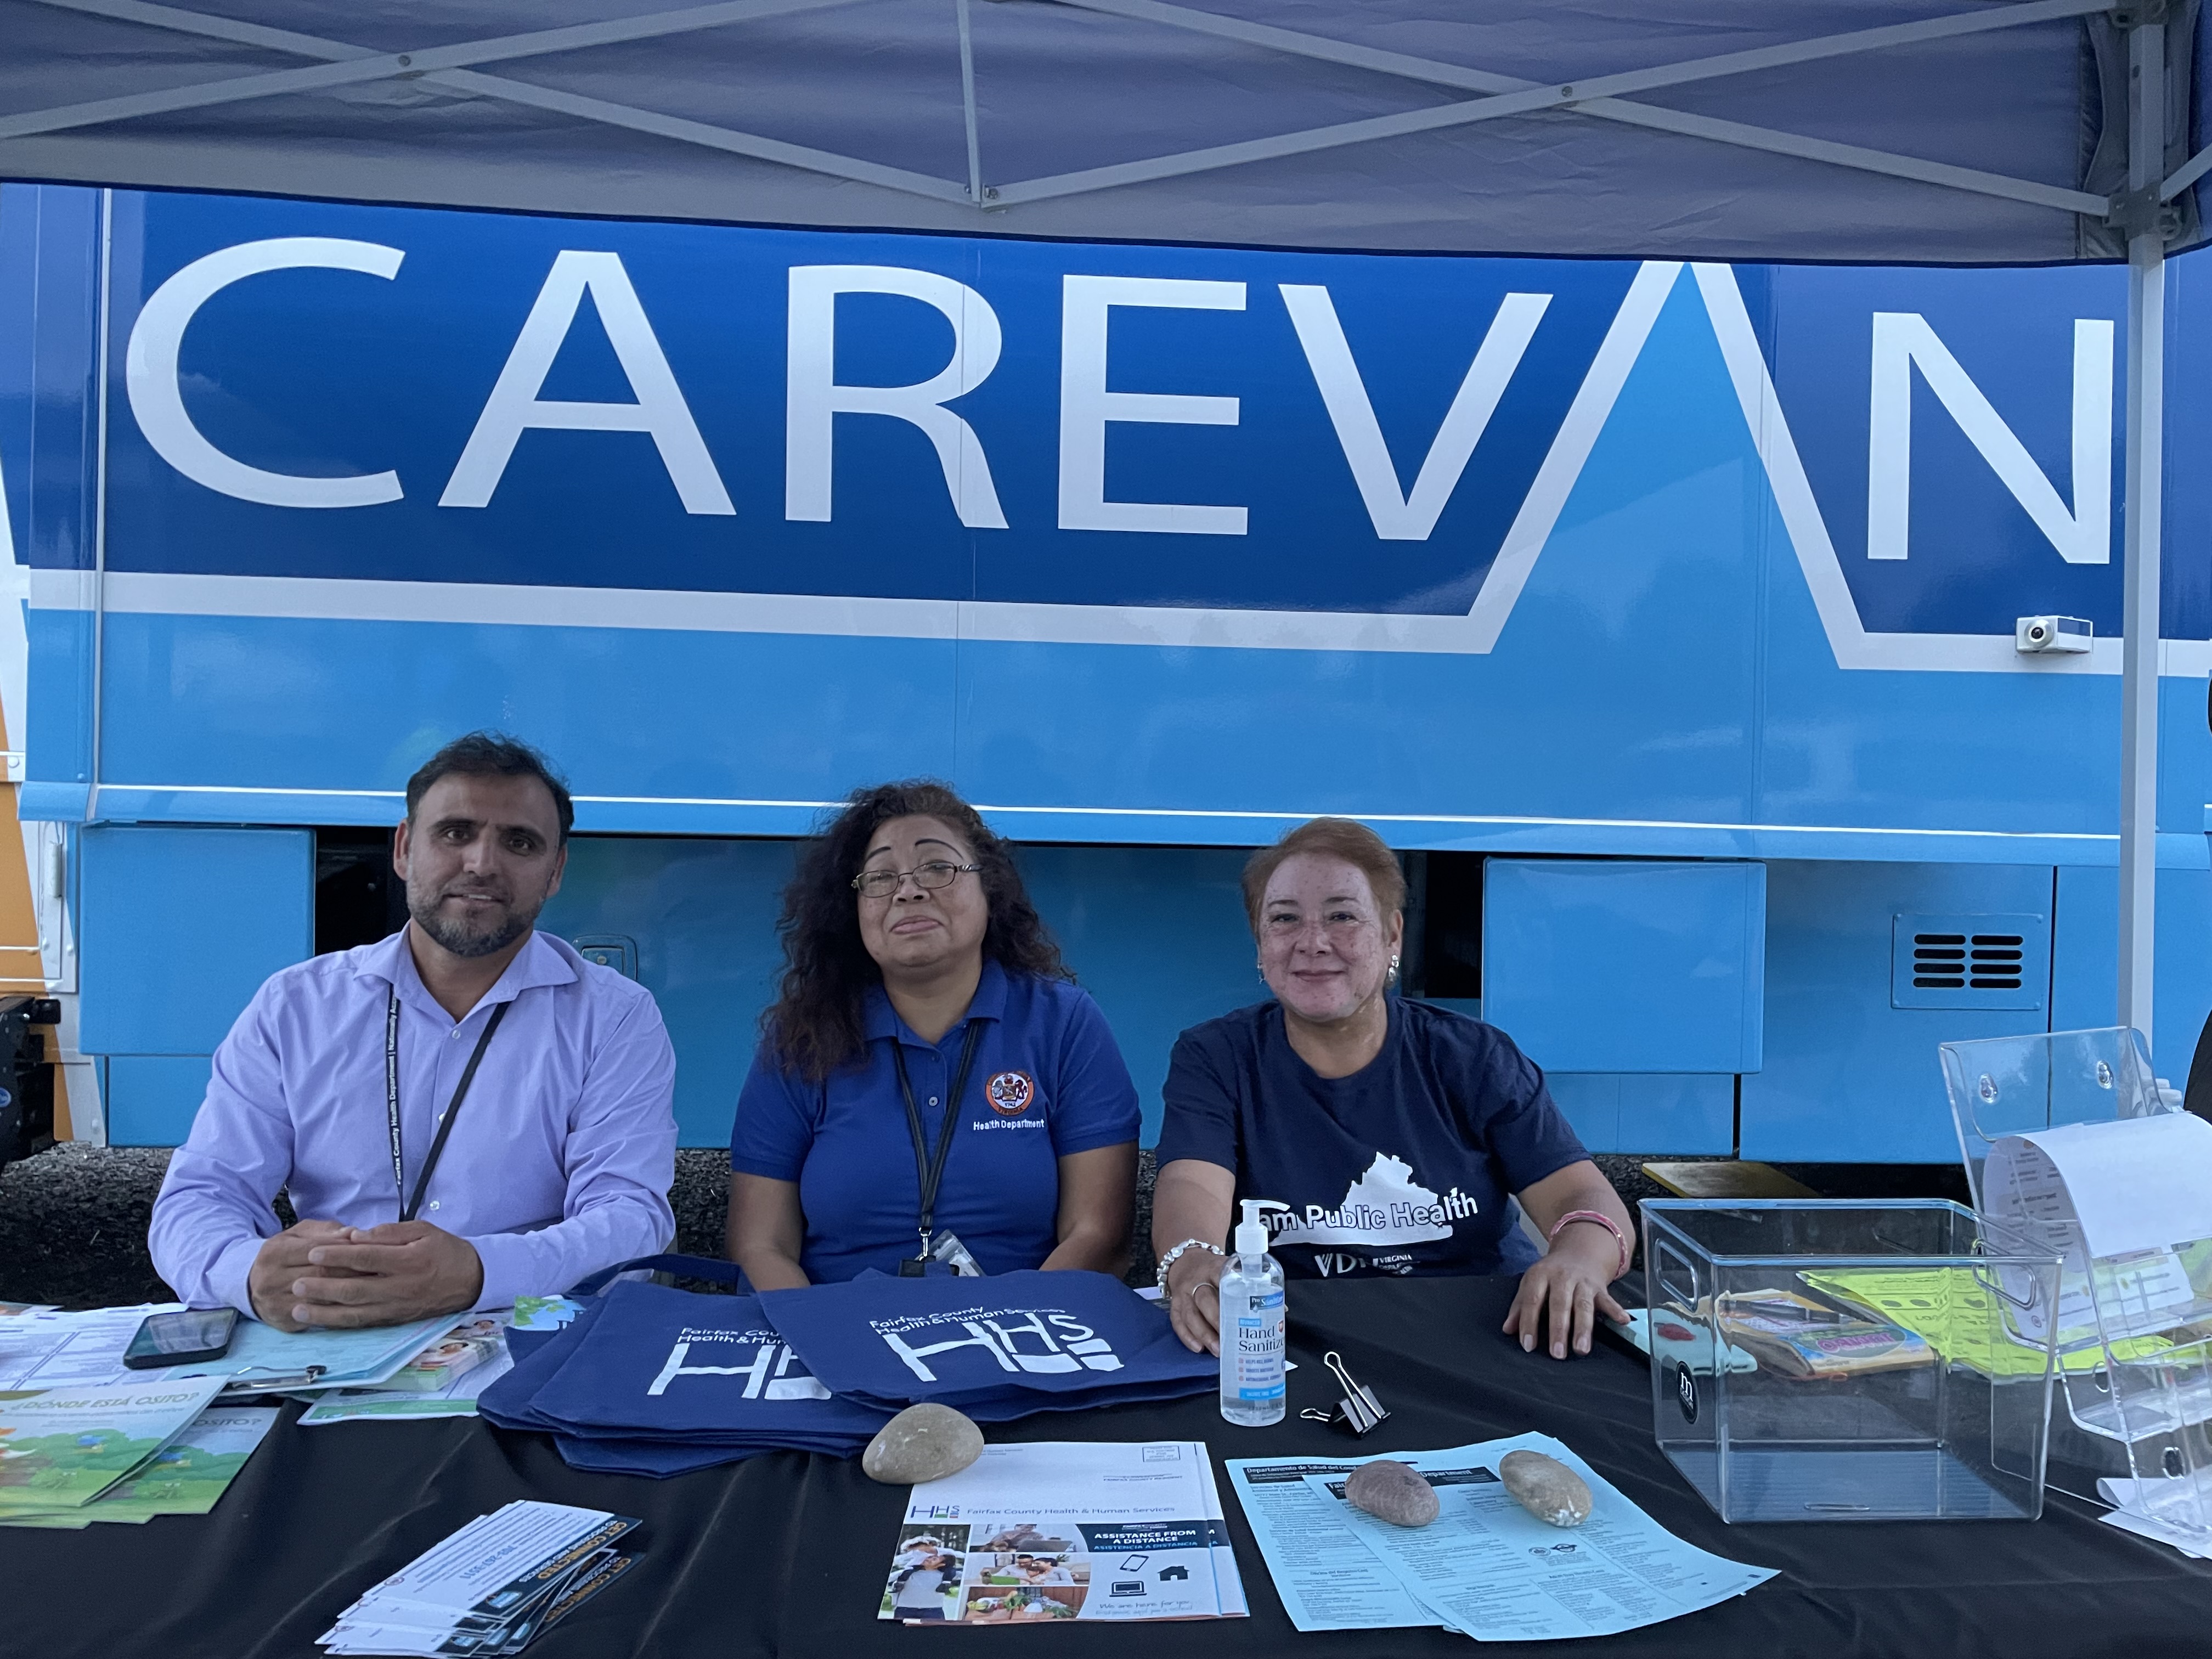 Health Department staff and Fairfax County CareVan at Afghan Day event